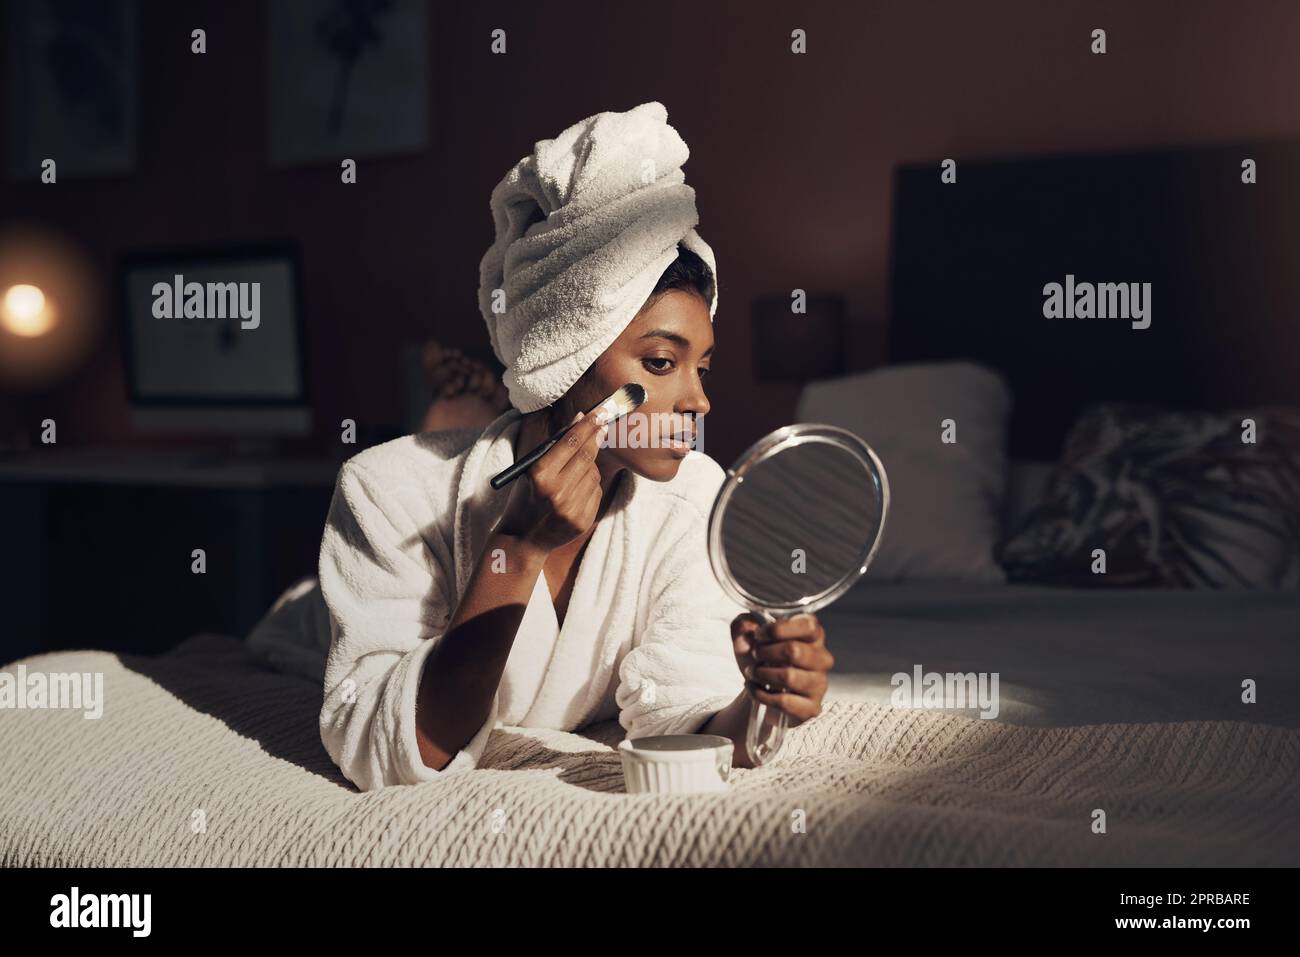 Pamper time is the closest experience to heaven on earth. a young woman giving herself a facial at home. Stock Photo